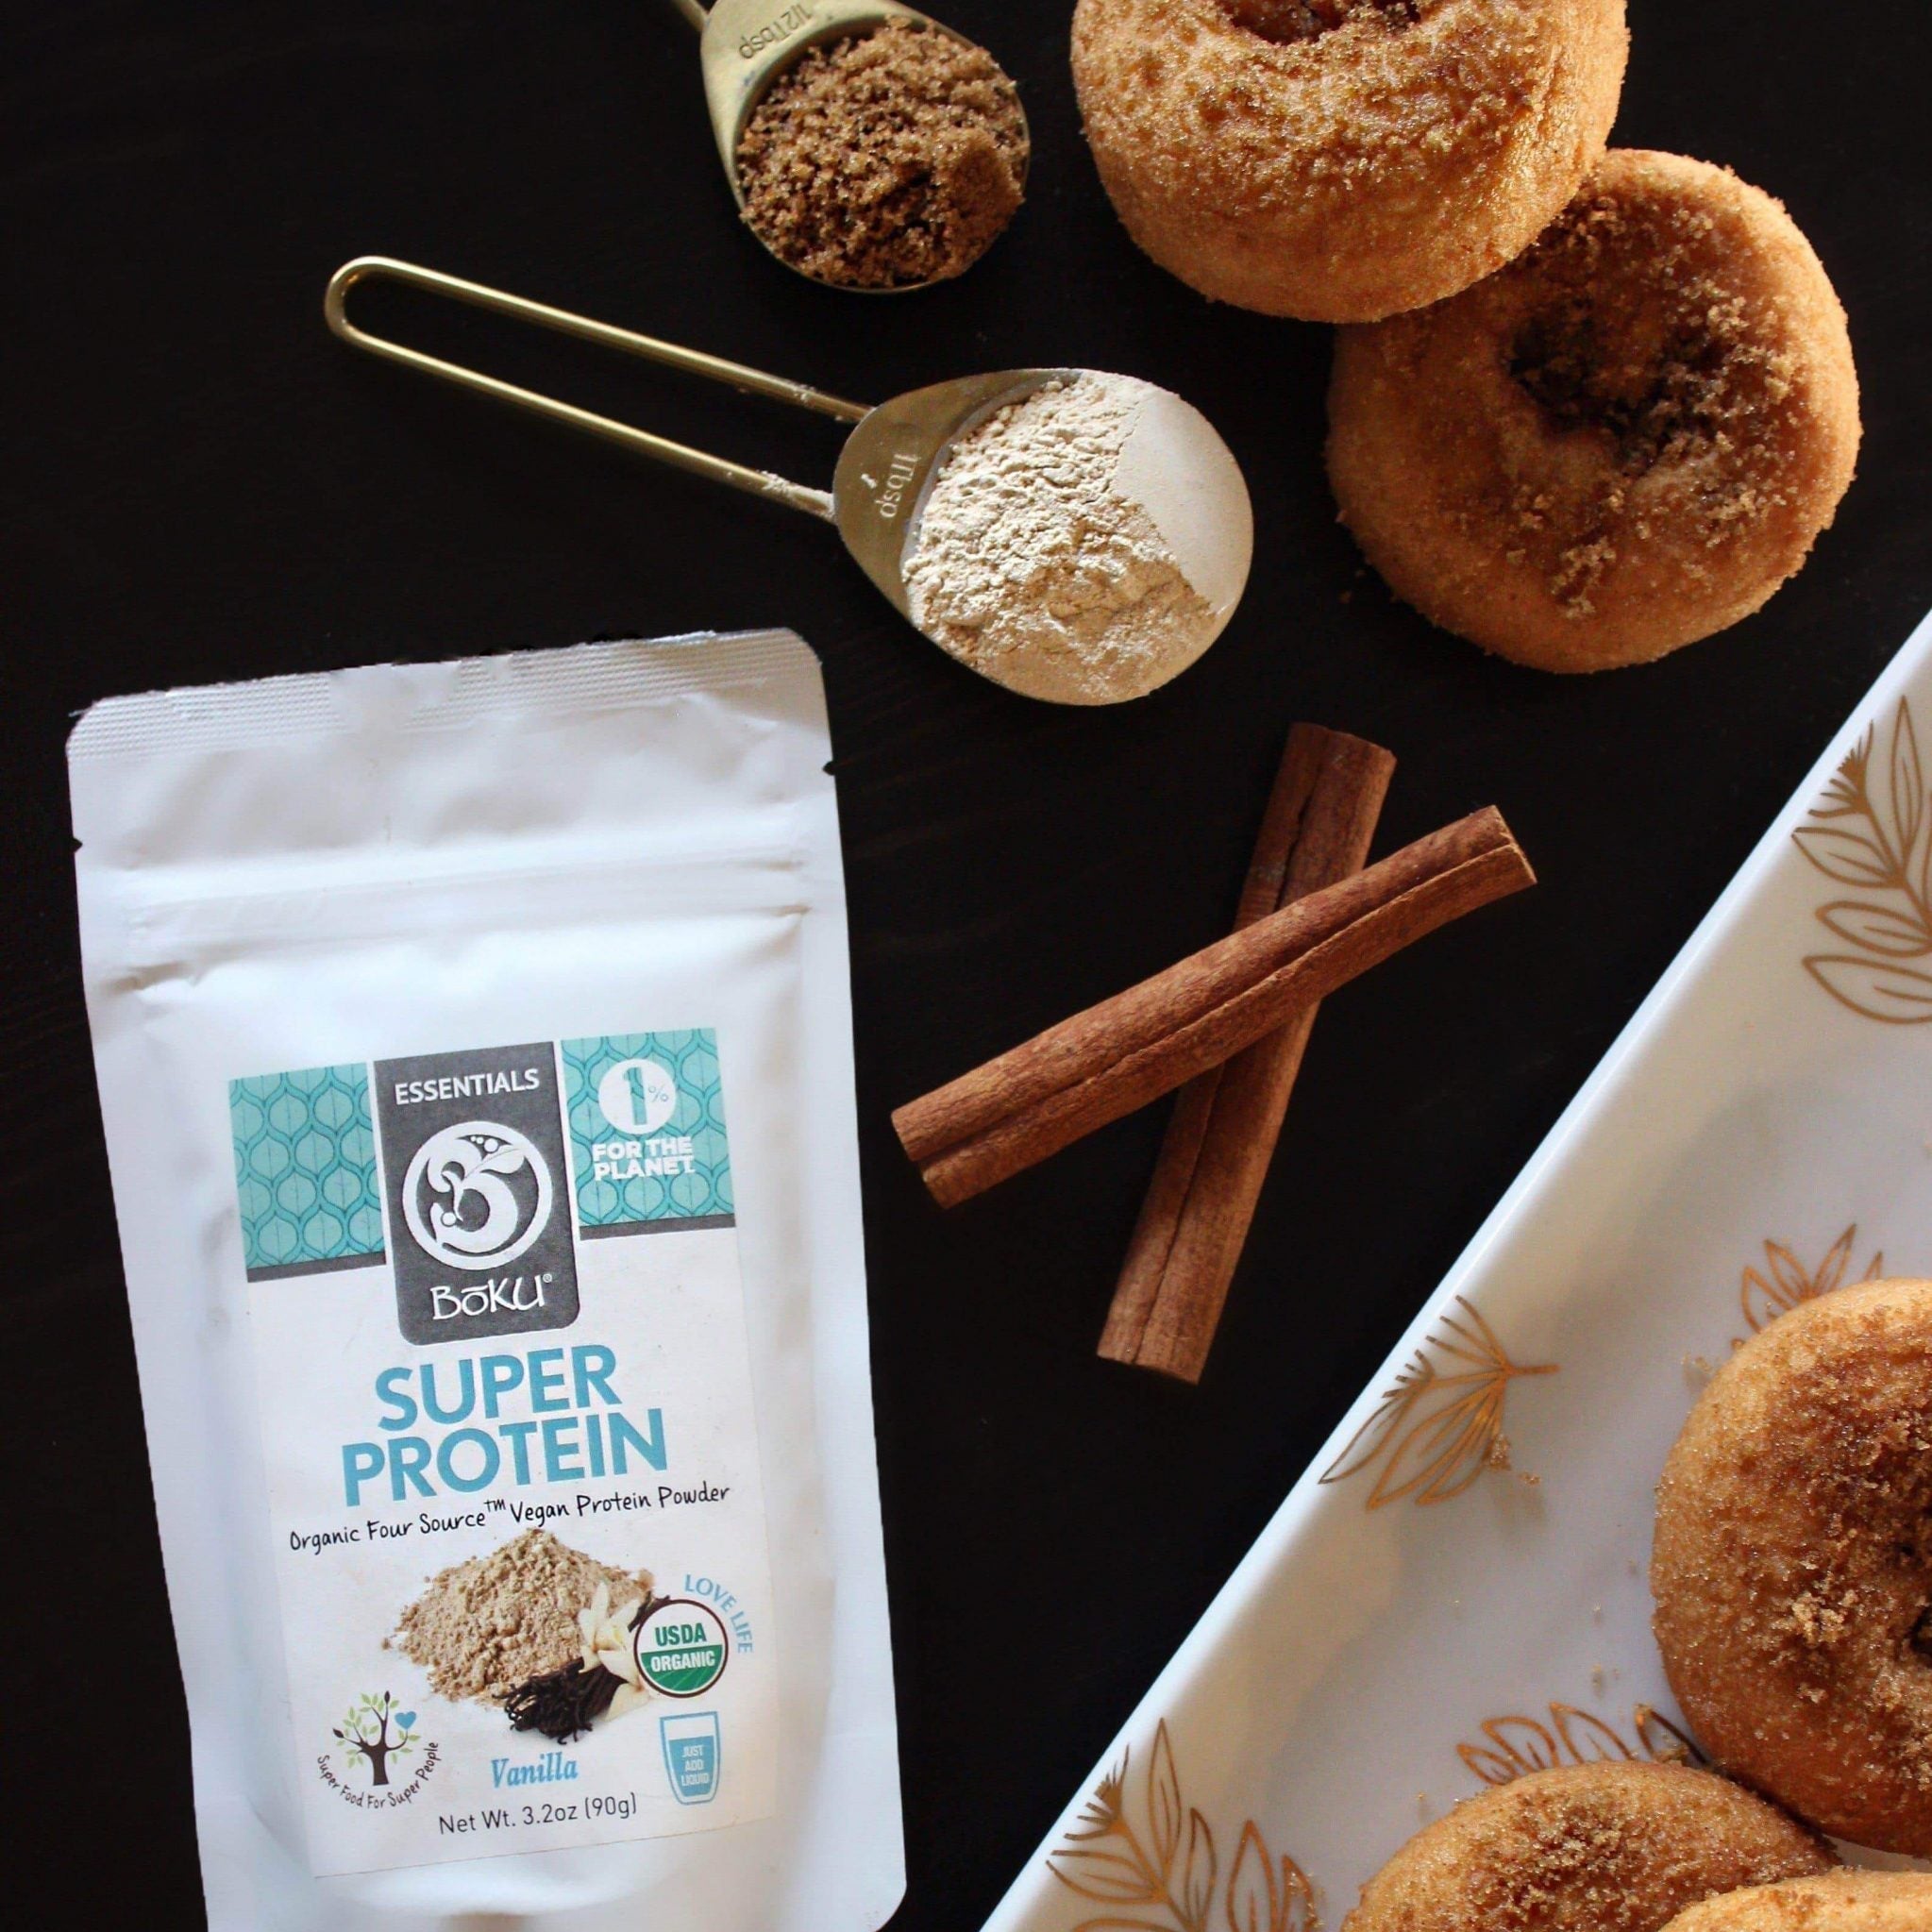 Cinnamon Baked Protein Donuts